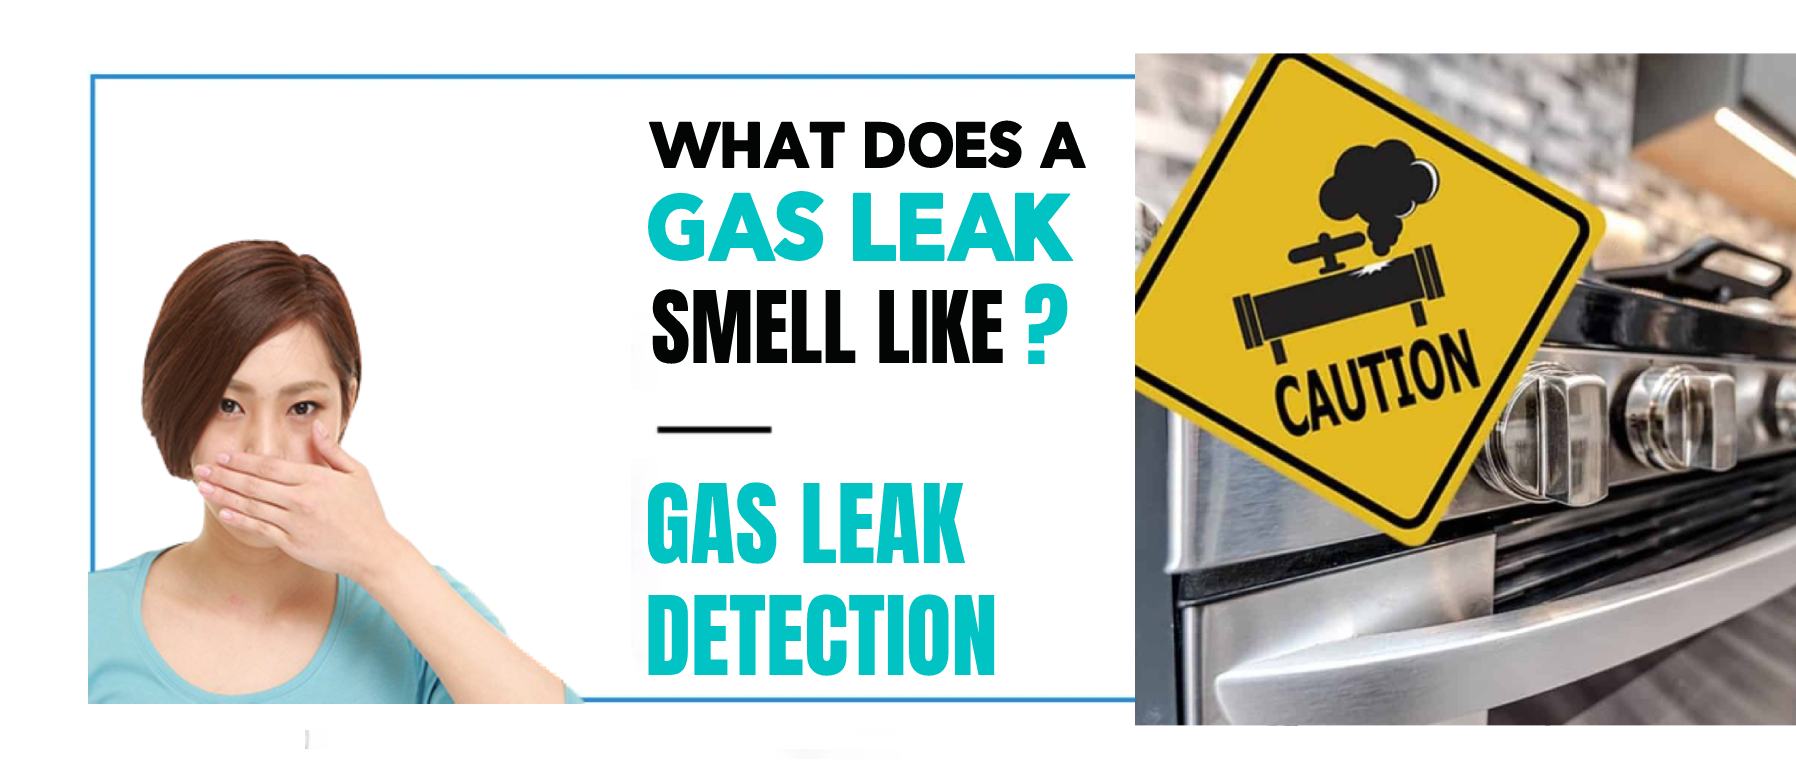 What Does a Gas Leak Smell Like? Gas Leak Detection – Understanding the Smell of a Gas Leak